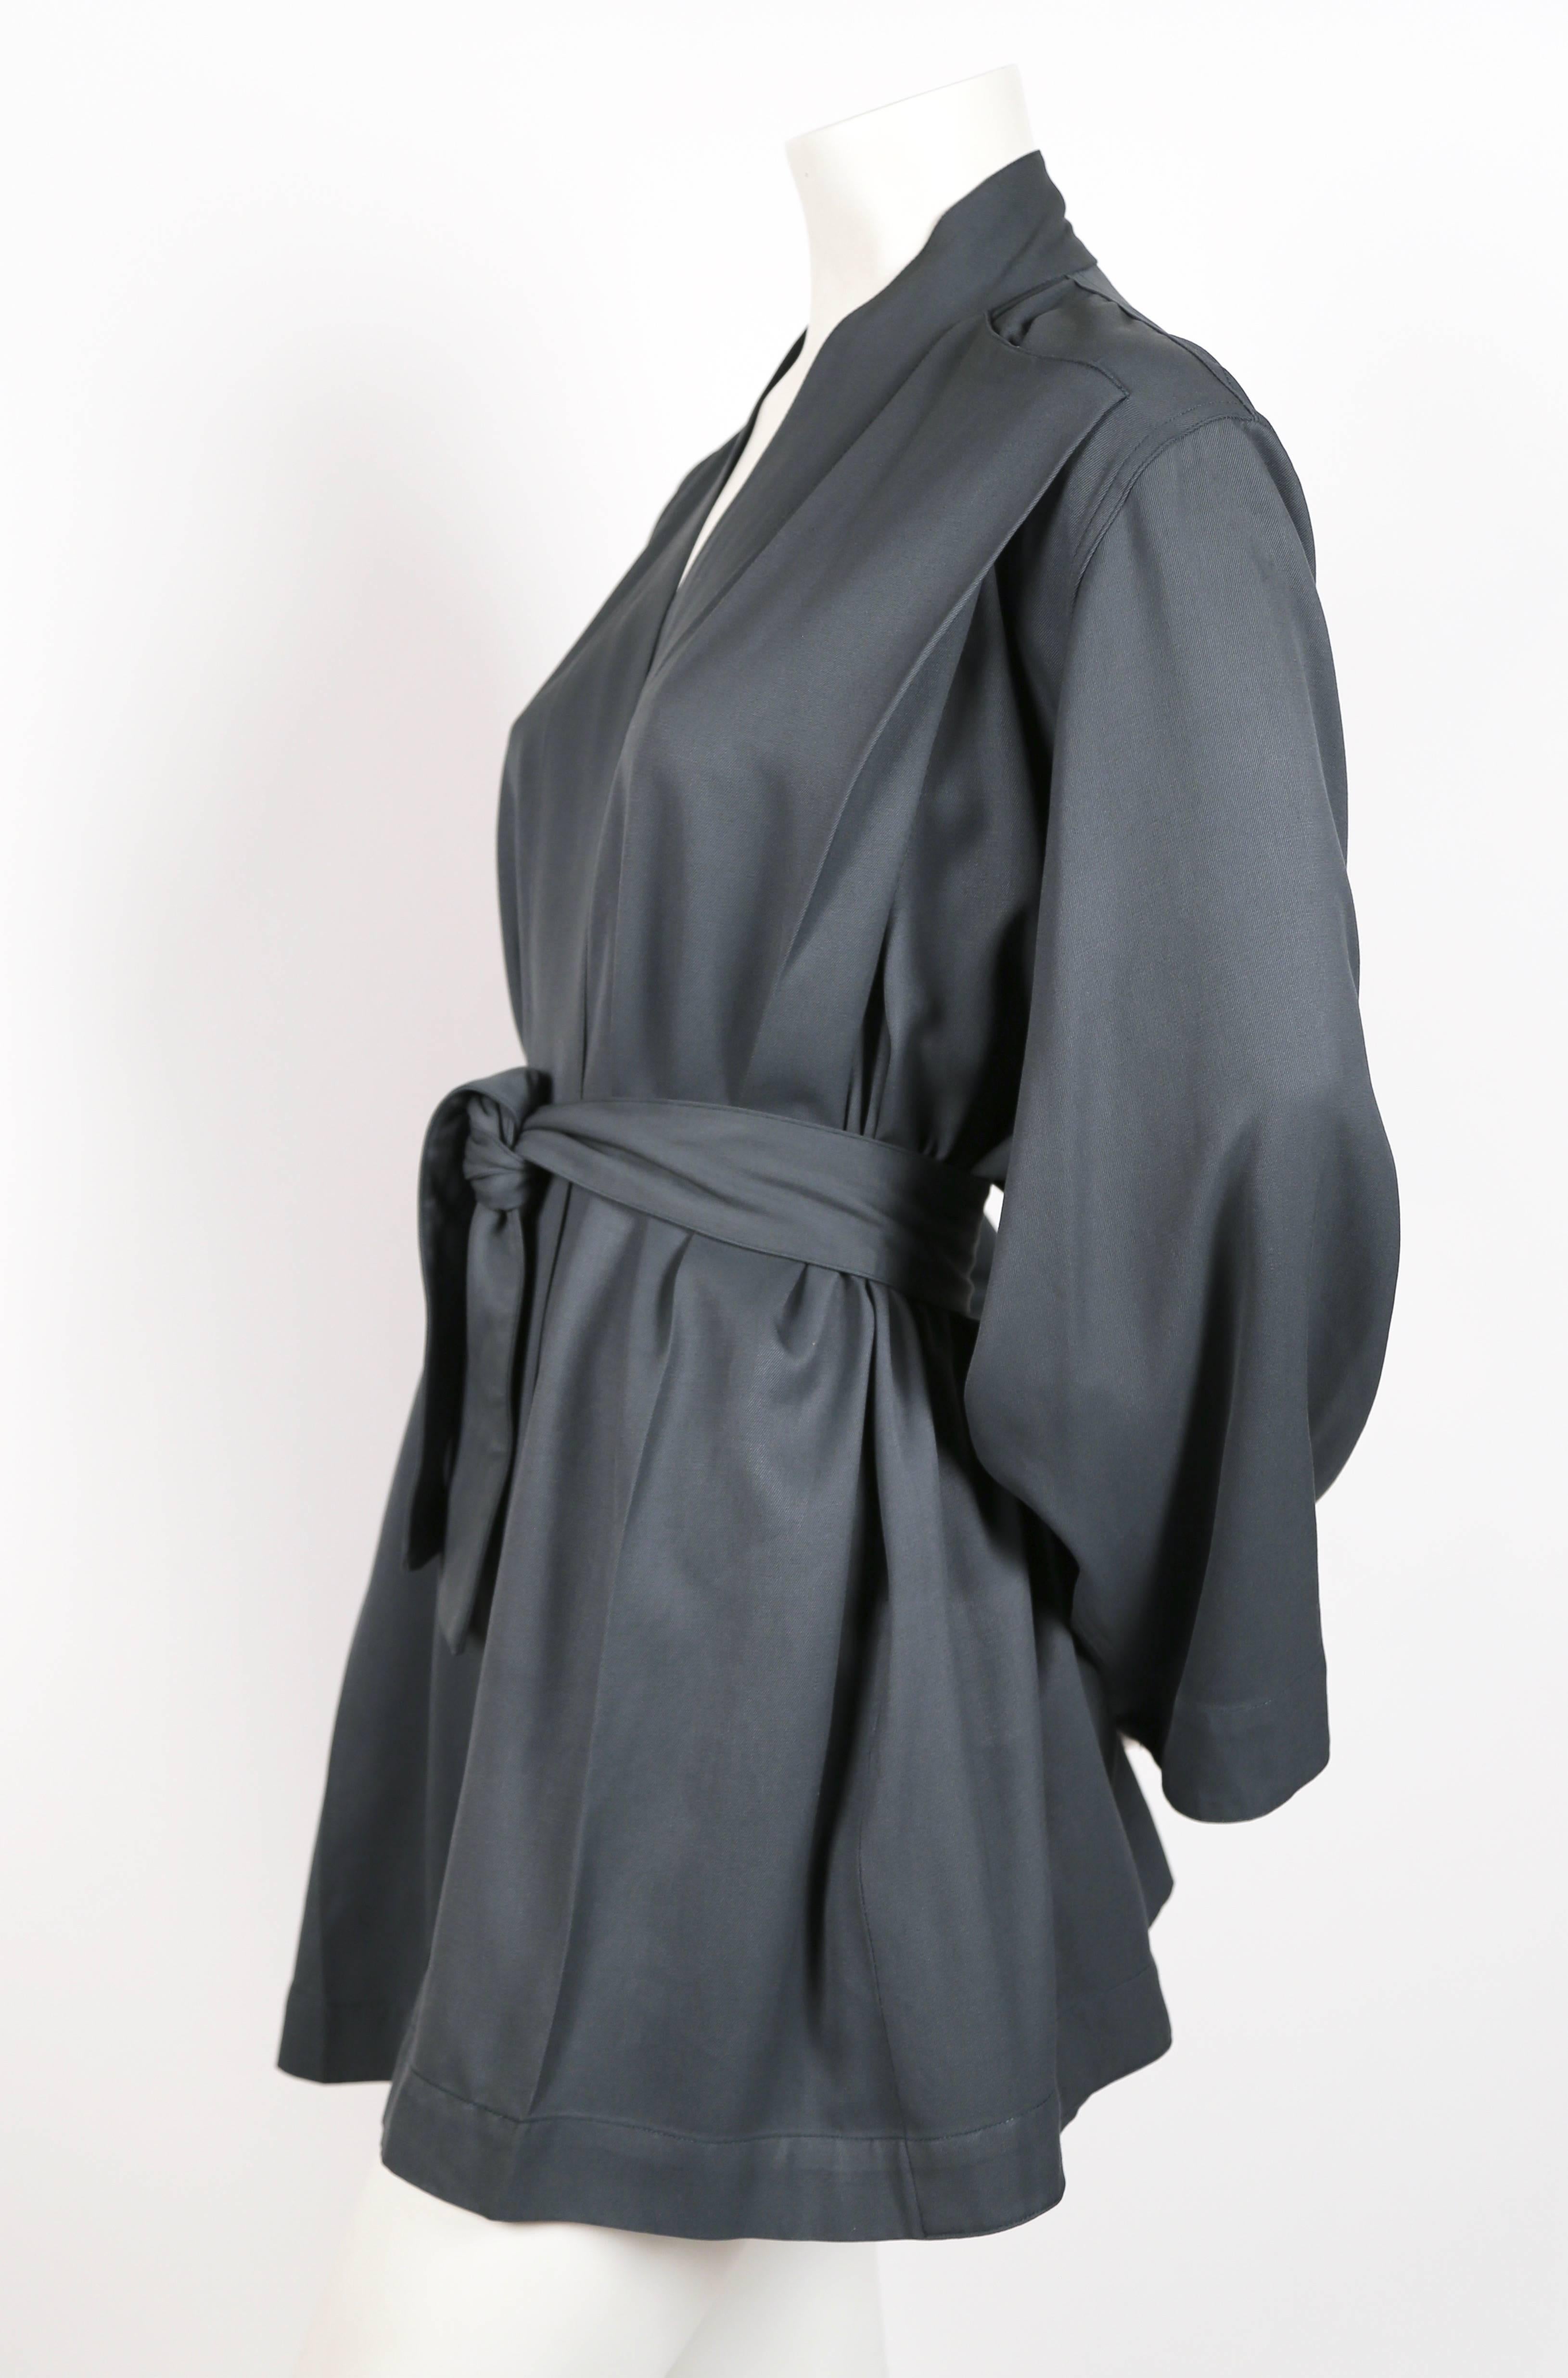 Muted teal wrap gabardine jacket with kimono style sleeves belted waist from Azzedine Alaia dating to the 1980s. There is no size indicated, although this jacket fits a size XS-M due to loose cut. Measures approximately: 18" at drop shoulder,